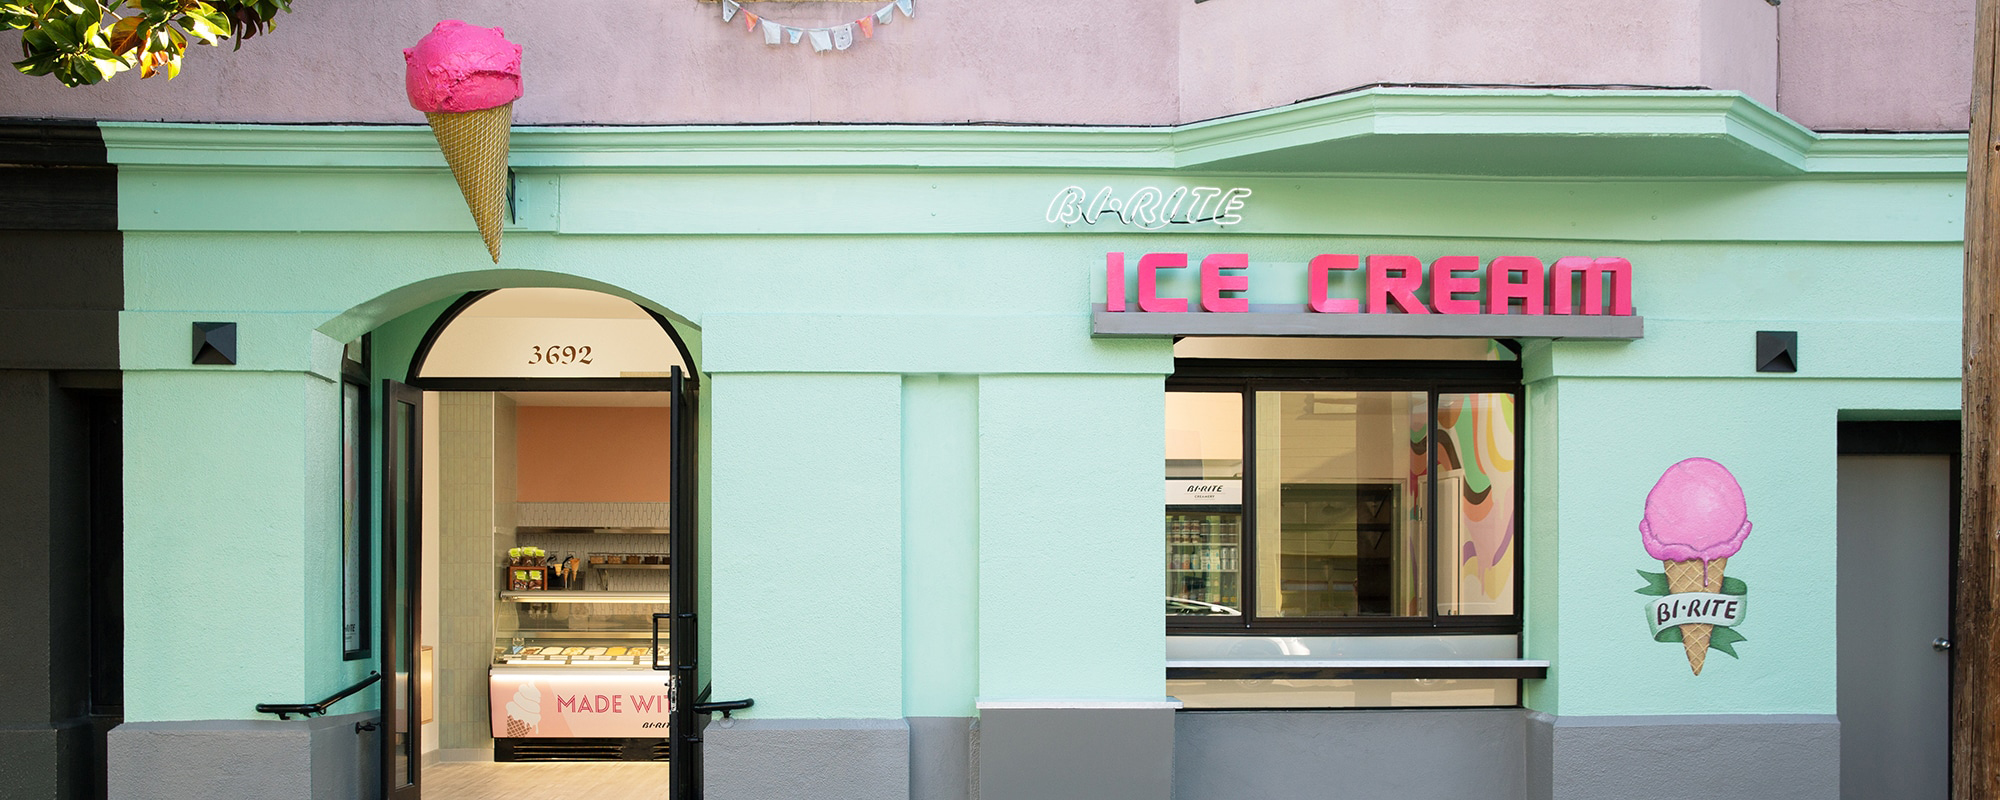 Front of green and pink Creamery, with ice cream cone sculpture above door and mural art on wall